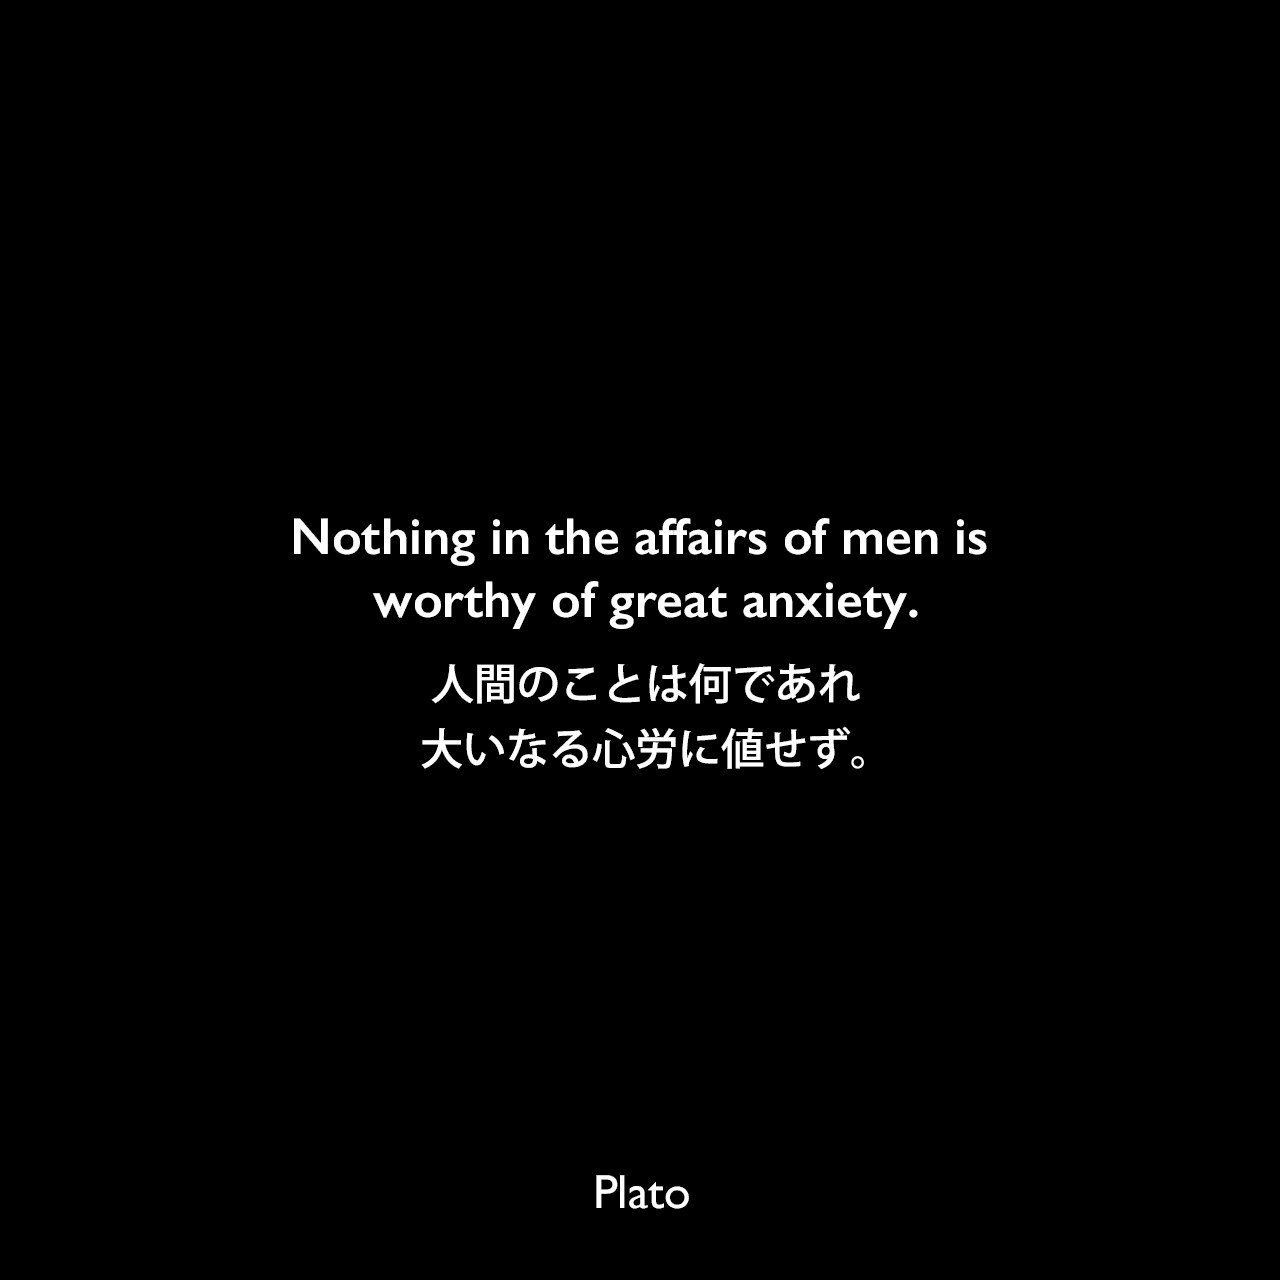 Nothing in the affairs of men is worthy of great anxiety.人間のことは何にてあれ、大いなる心労に値せず。Plato